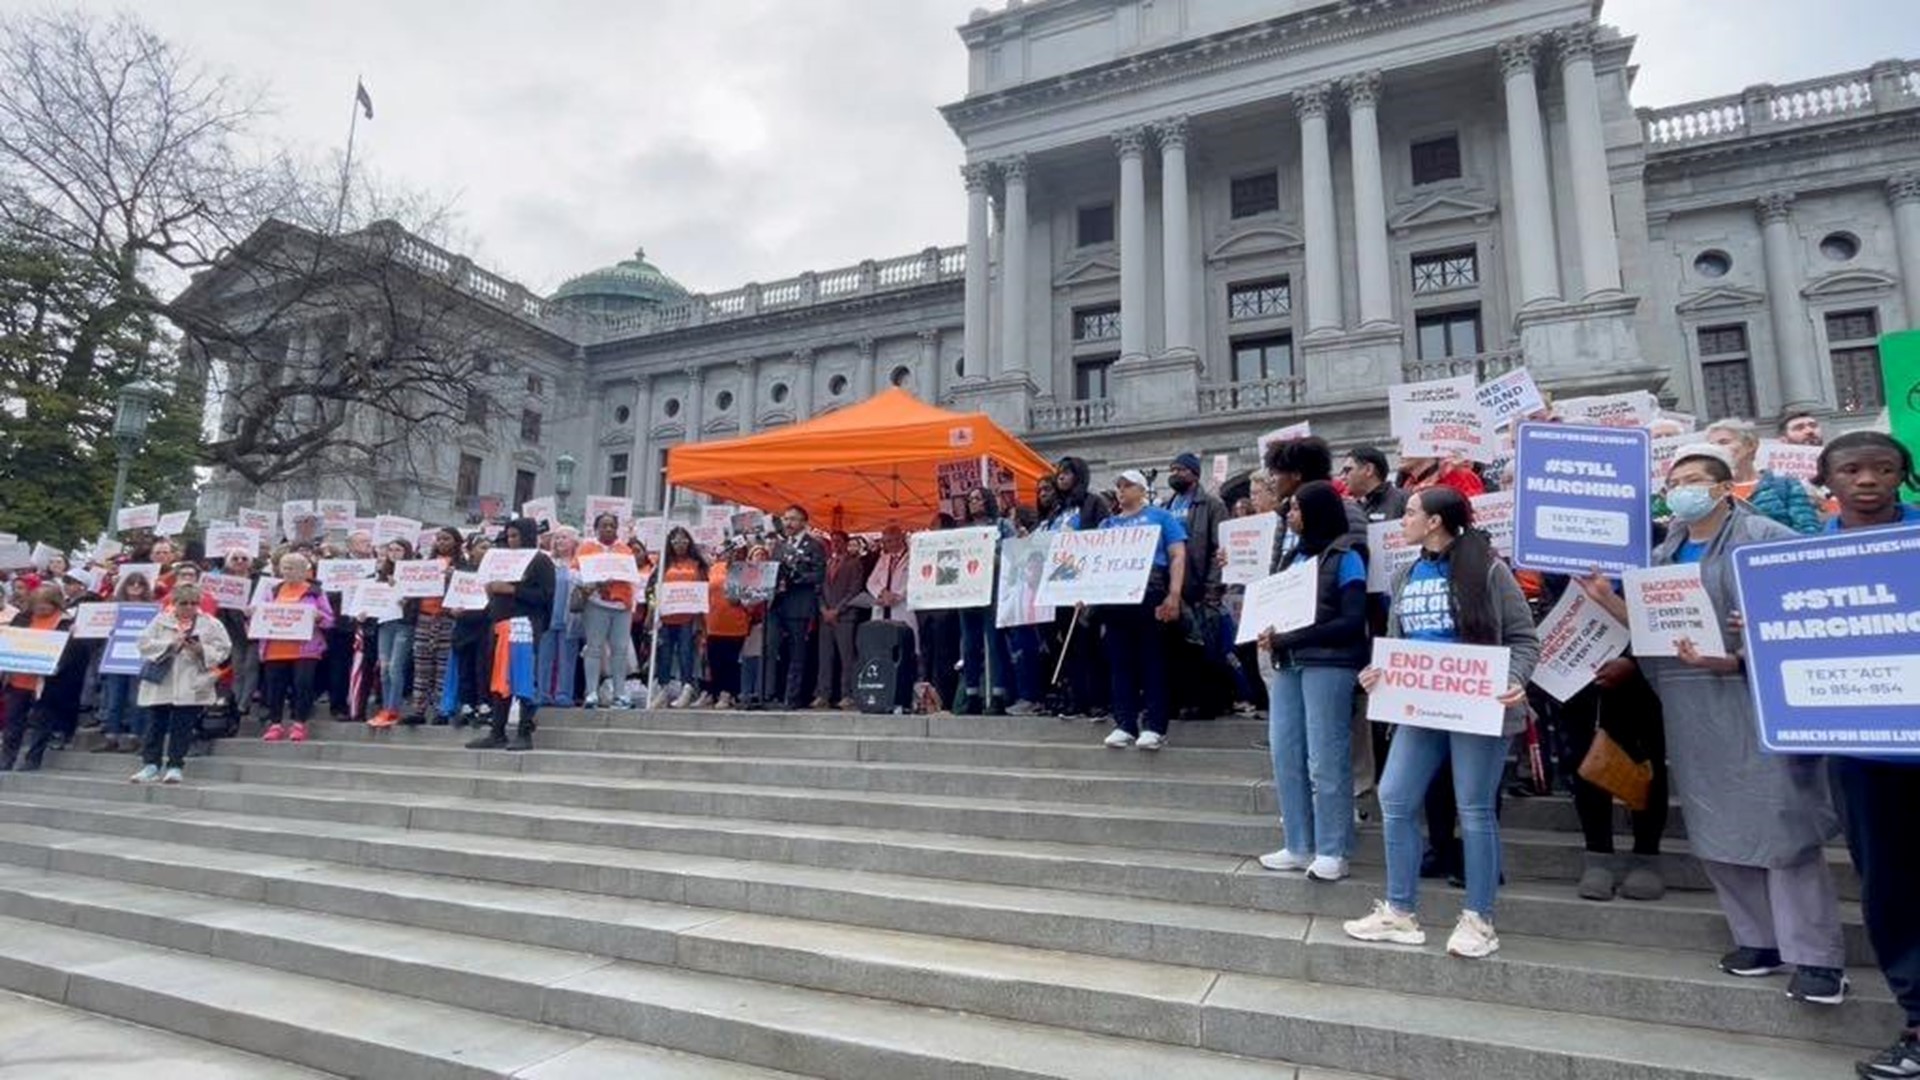 A rally against gun violence brought hundreds to Harrisburg on Thursday to call for more gun control laws.